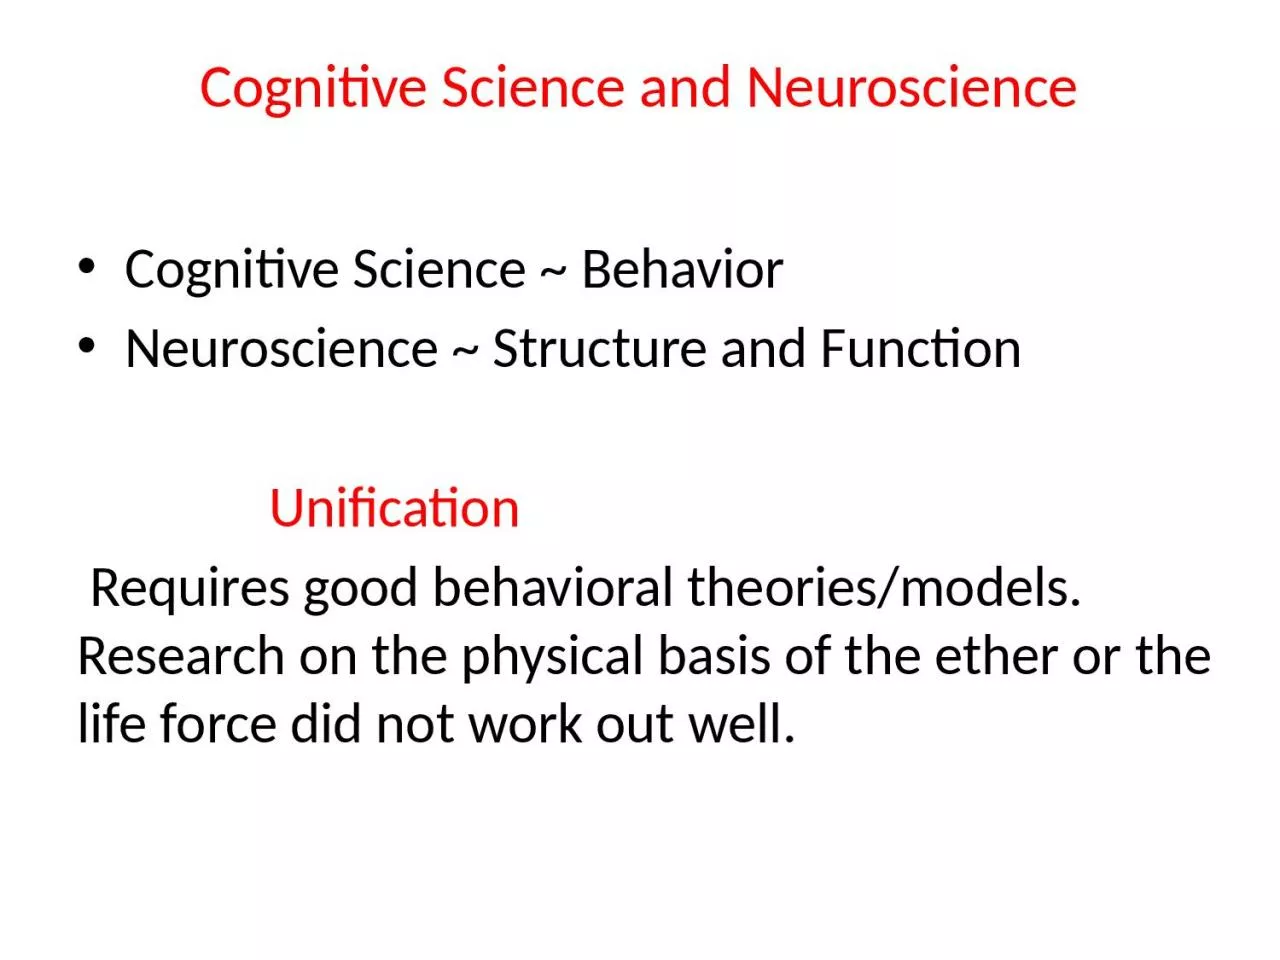 Cognitive Science and Neuroscience